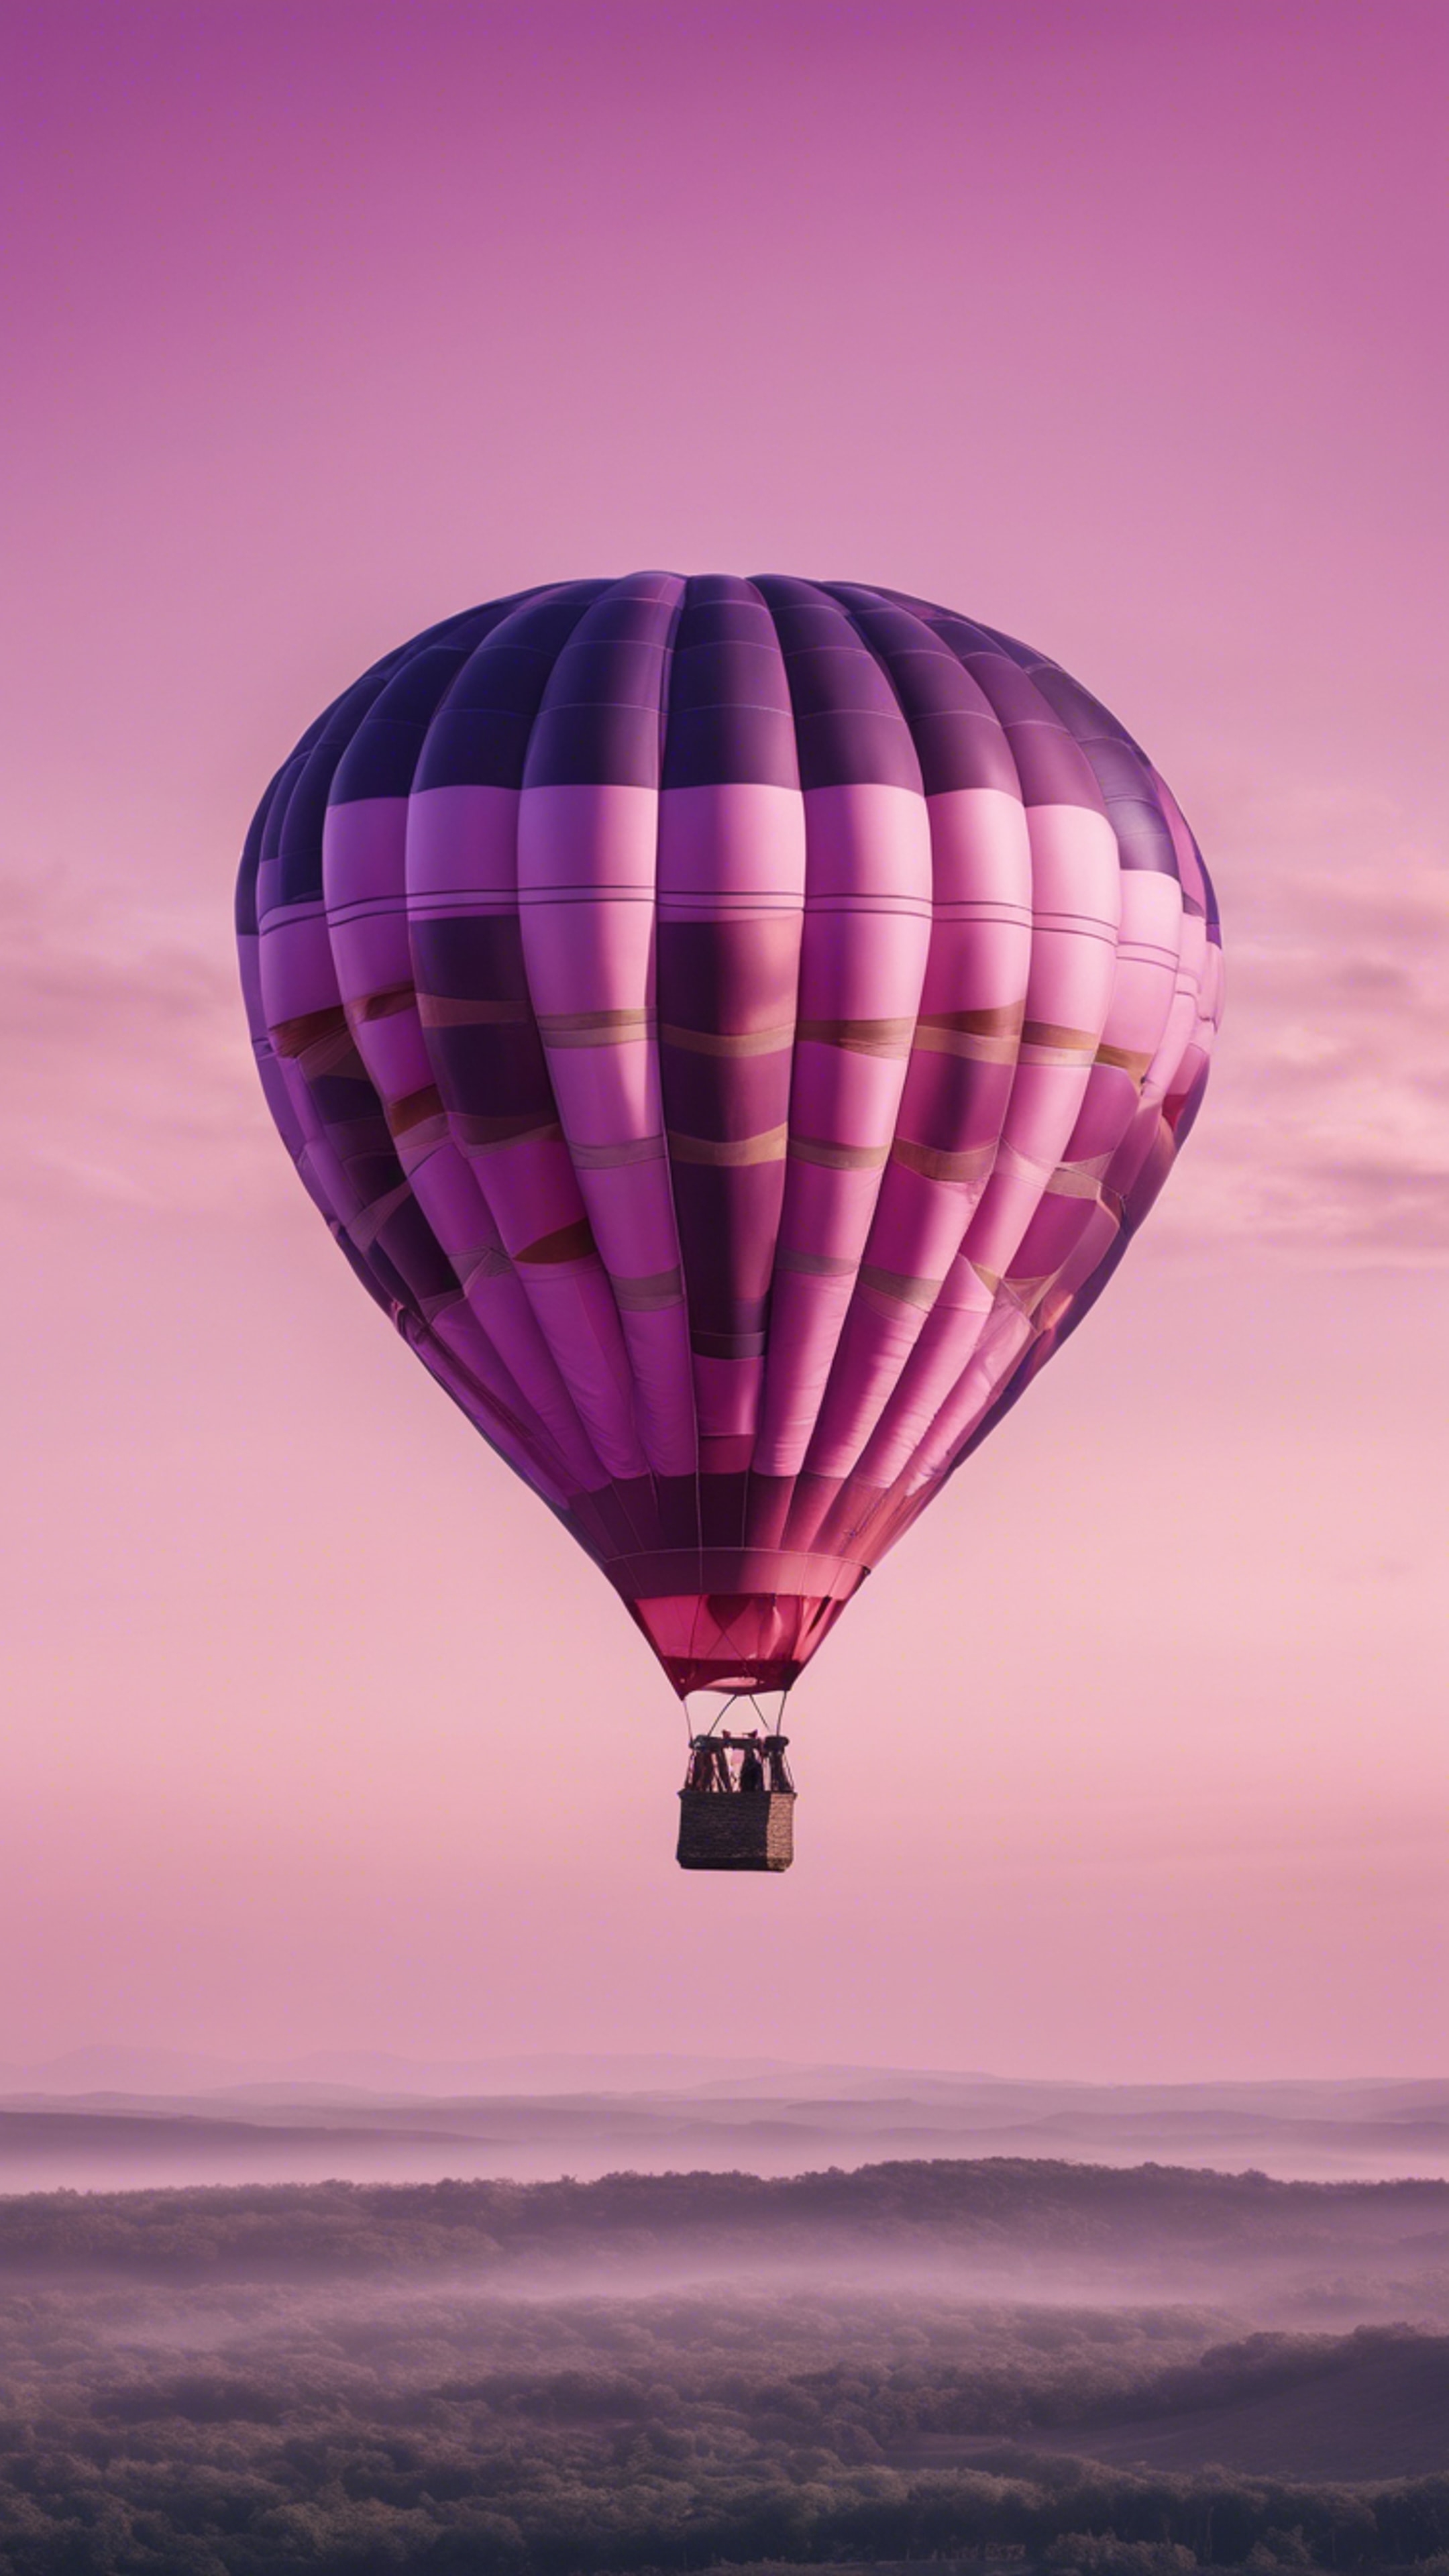 A pink and purple striped hot air balloon floating in a clear morning sky. Hintergrund[24bb758d911f4cfb8c8f]